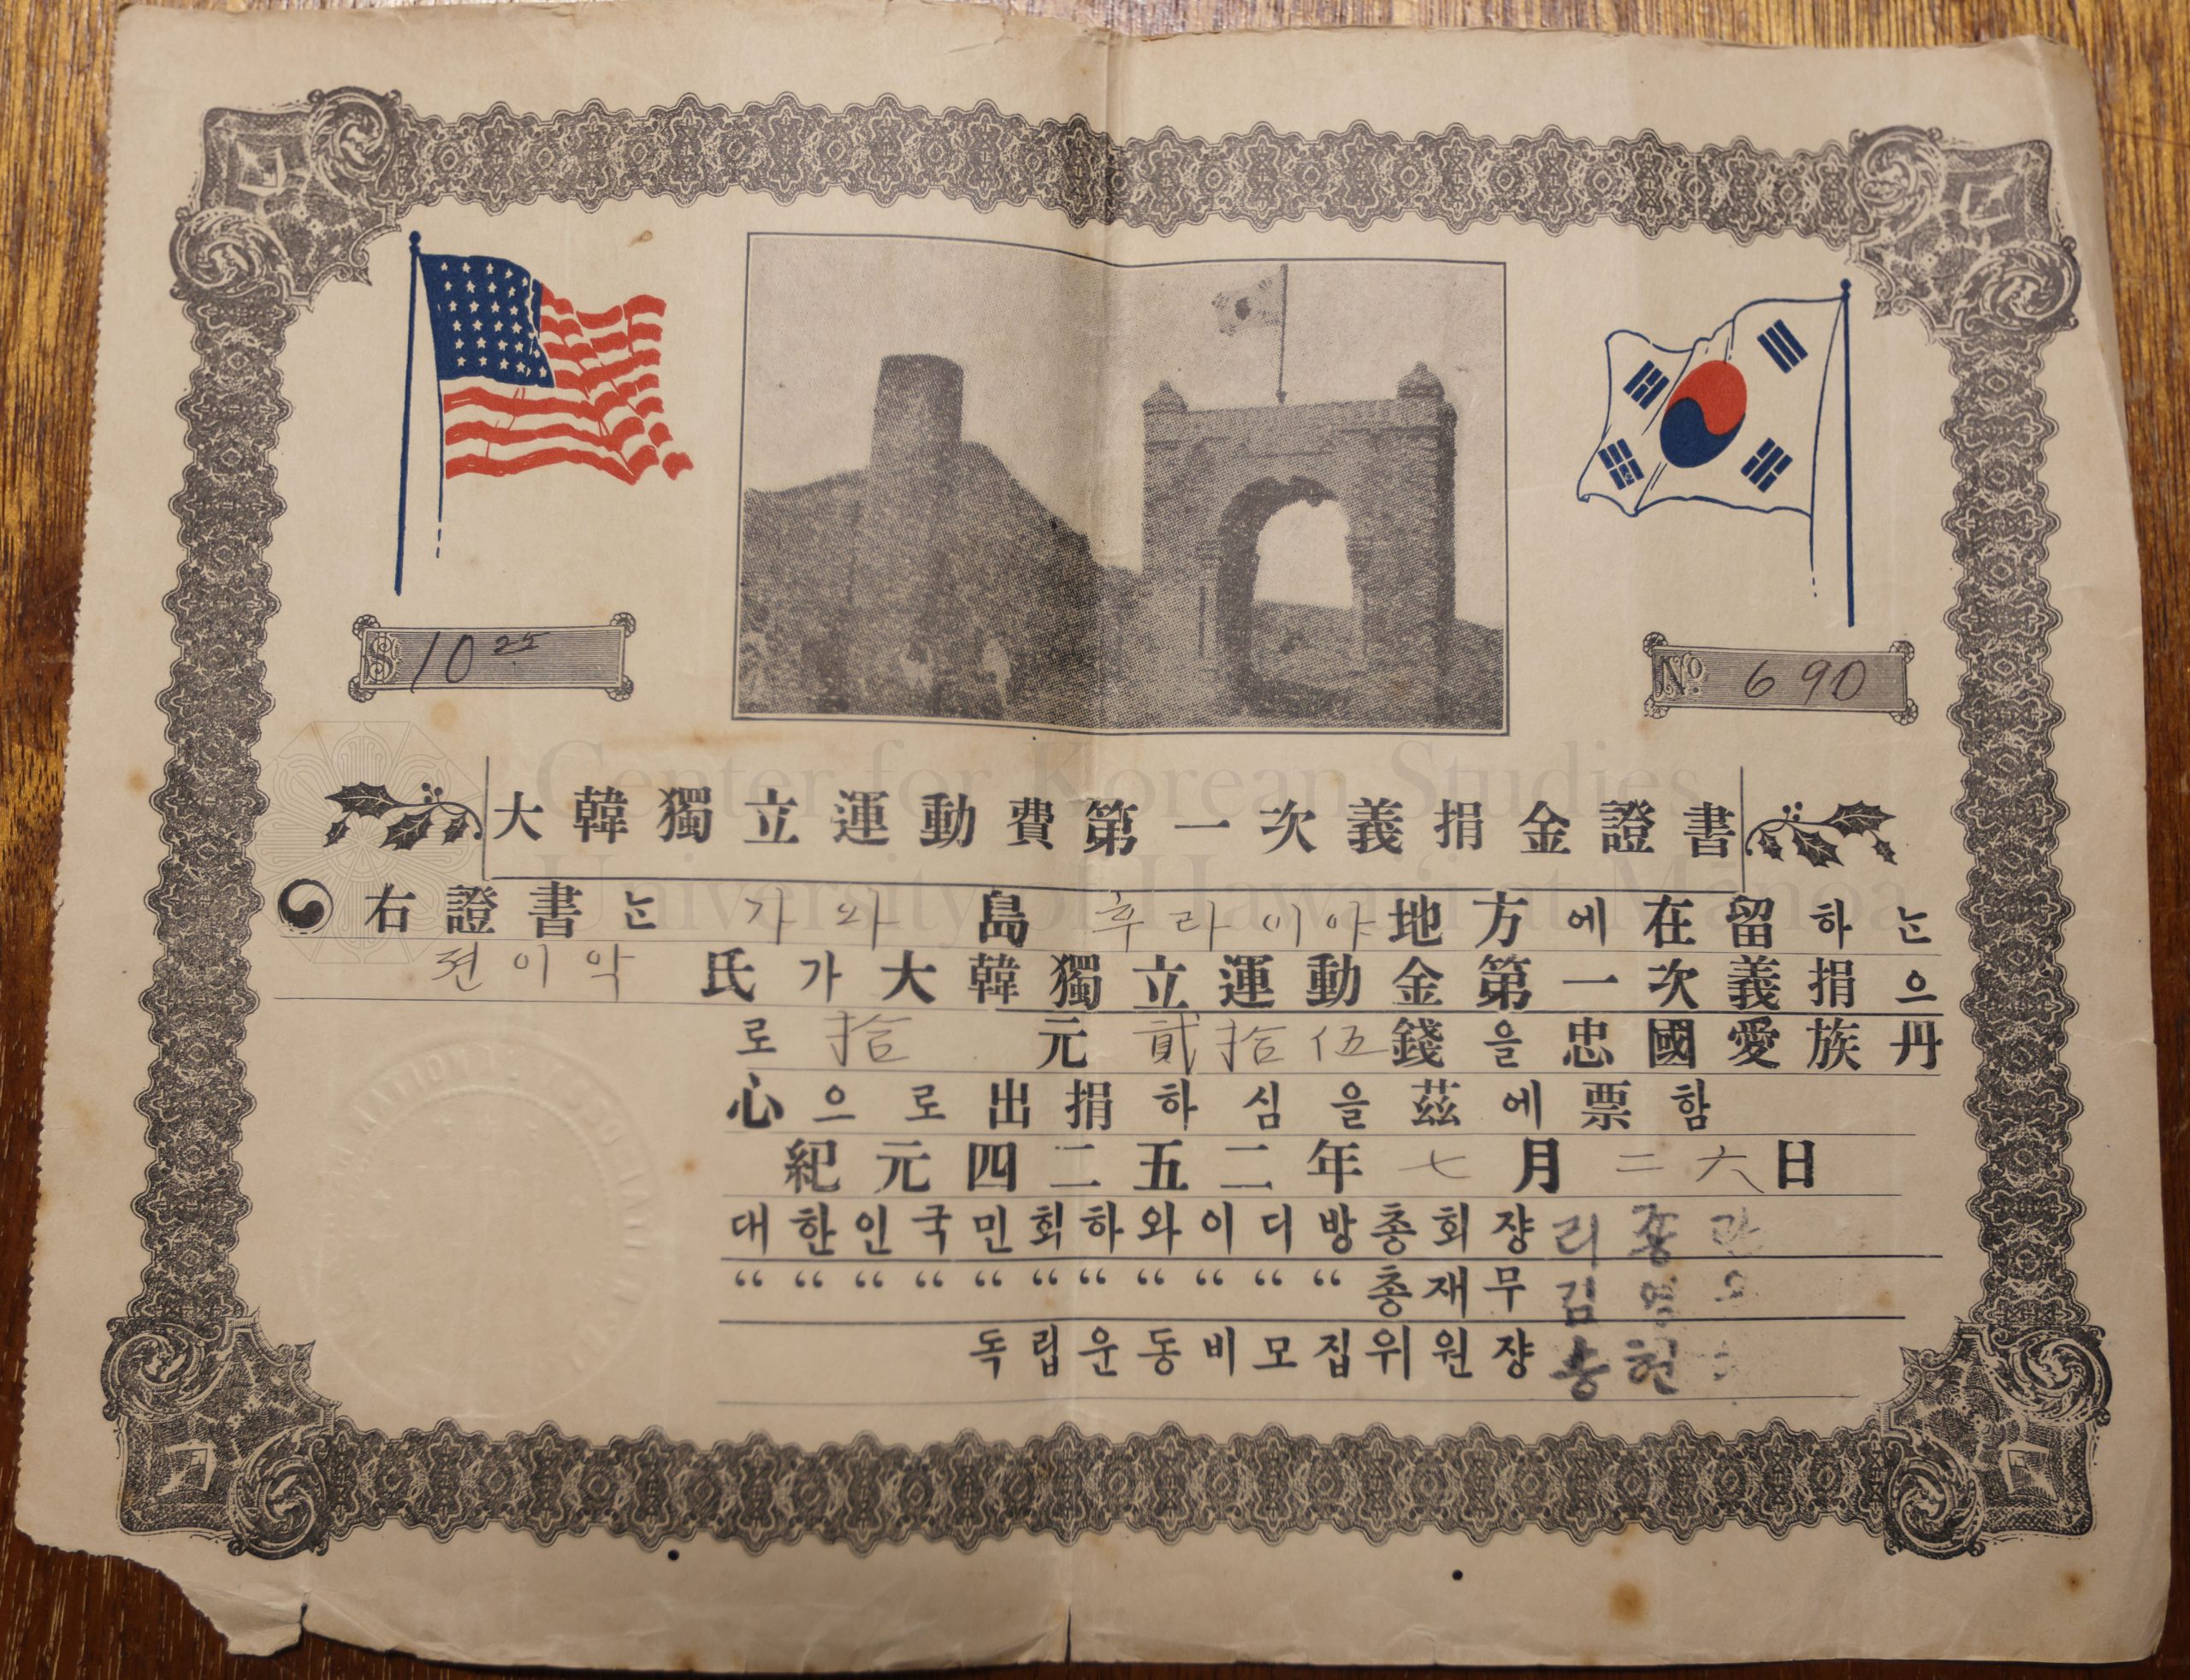 Special fees for supporting Korean Independence Movement, 1919 (Olive United Methodist Church)